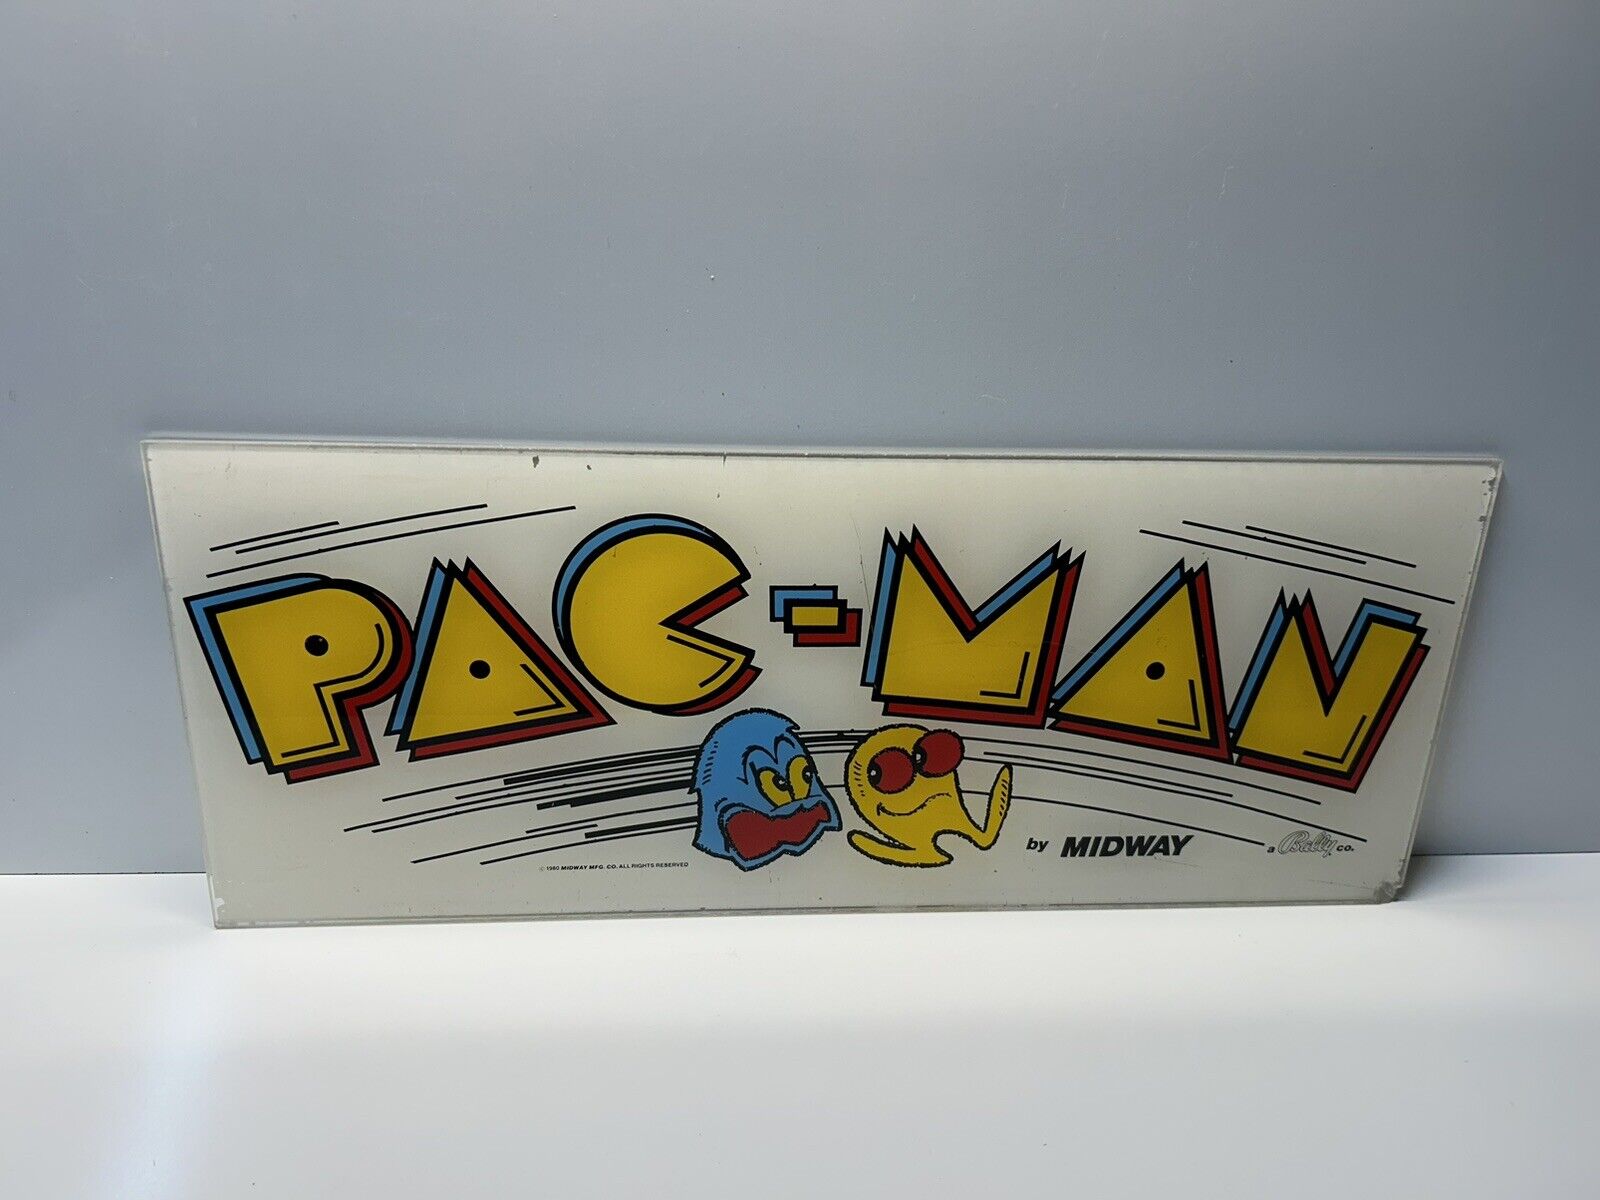 Pac-Man Arcade Sign Marquee 1980 Video Game Midway A Bally Co. Vintage Original